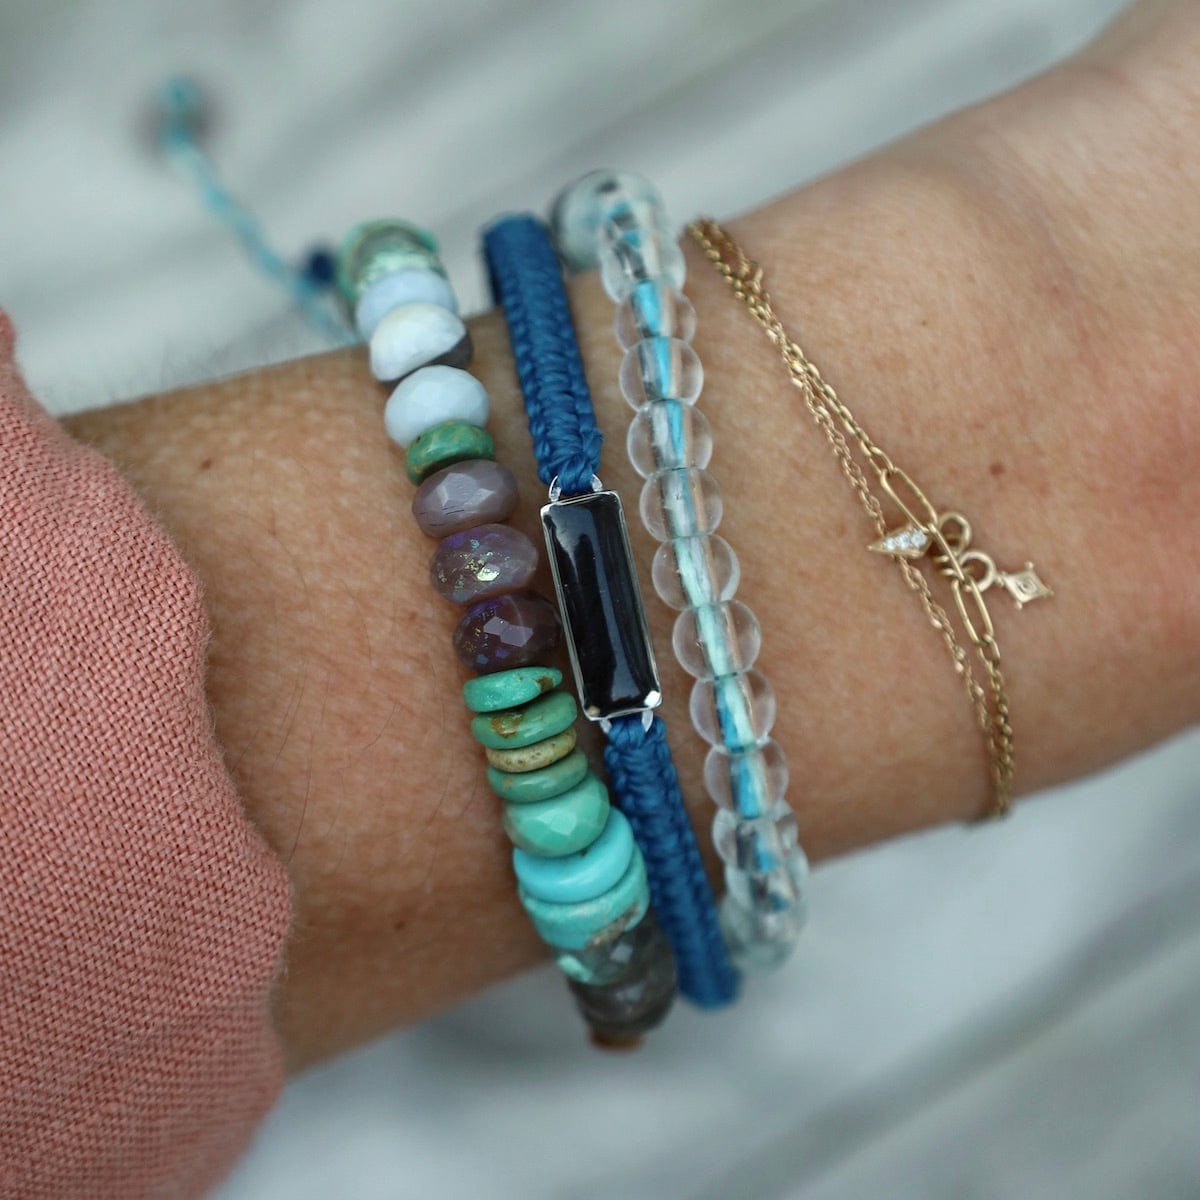 Join the Wave Today with 4ocean's Last Straw Bracelet Collection! -  Karmactive